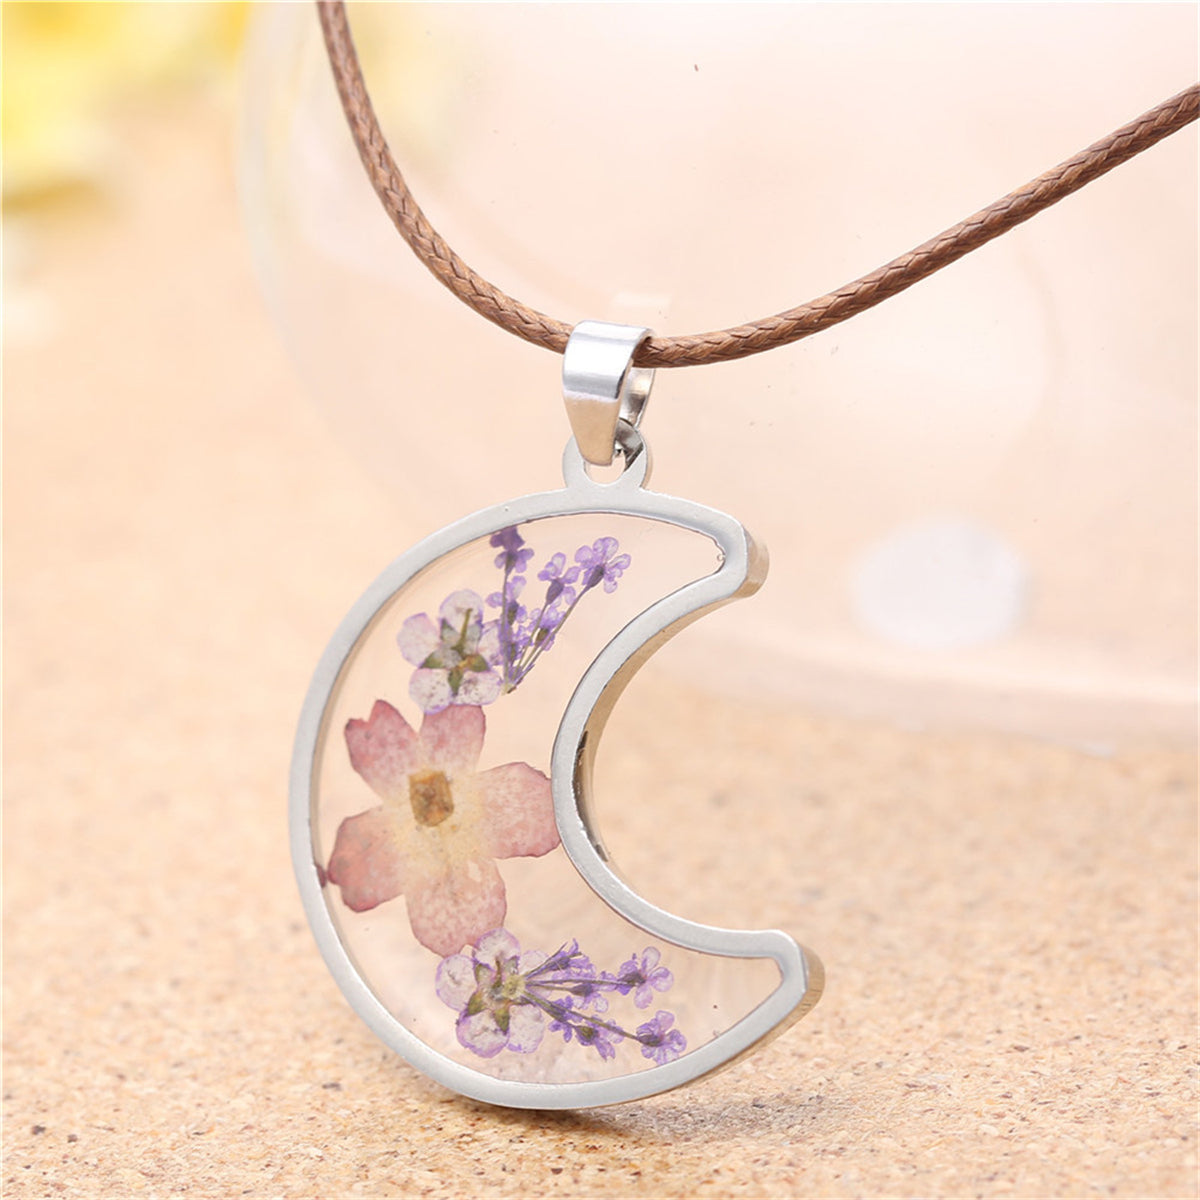 Purple Peach Blossom & Silver-Plated Moon Pendant Necklace